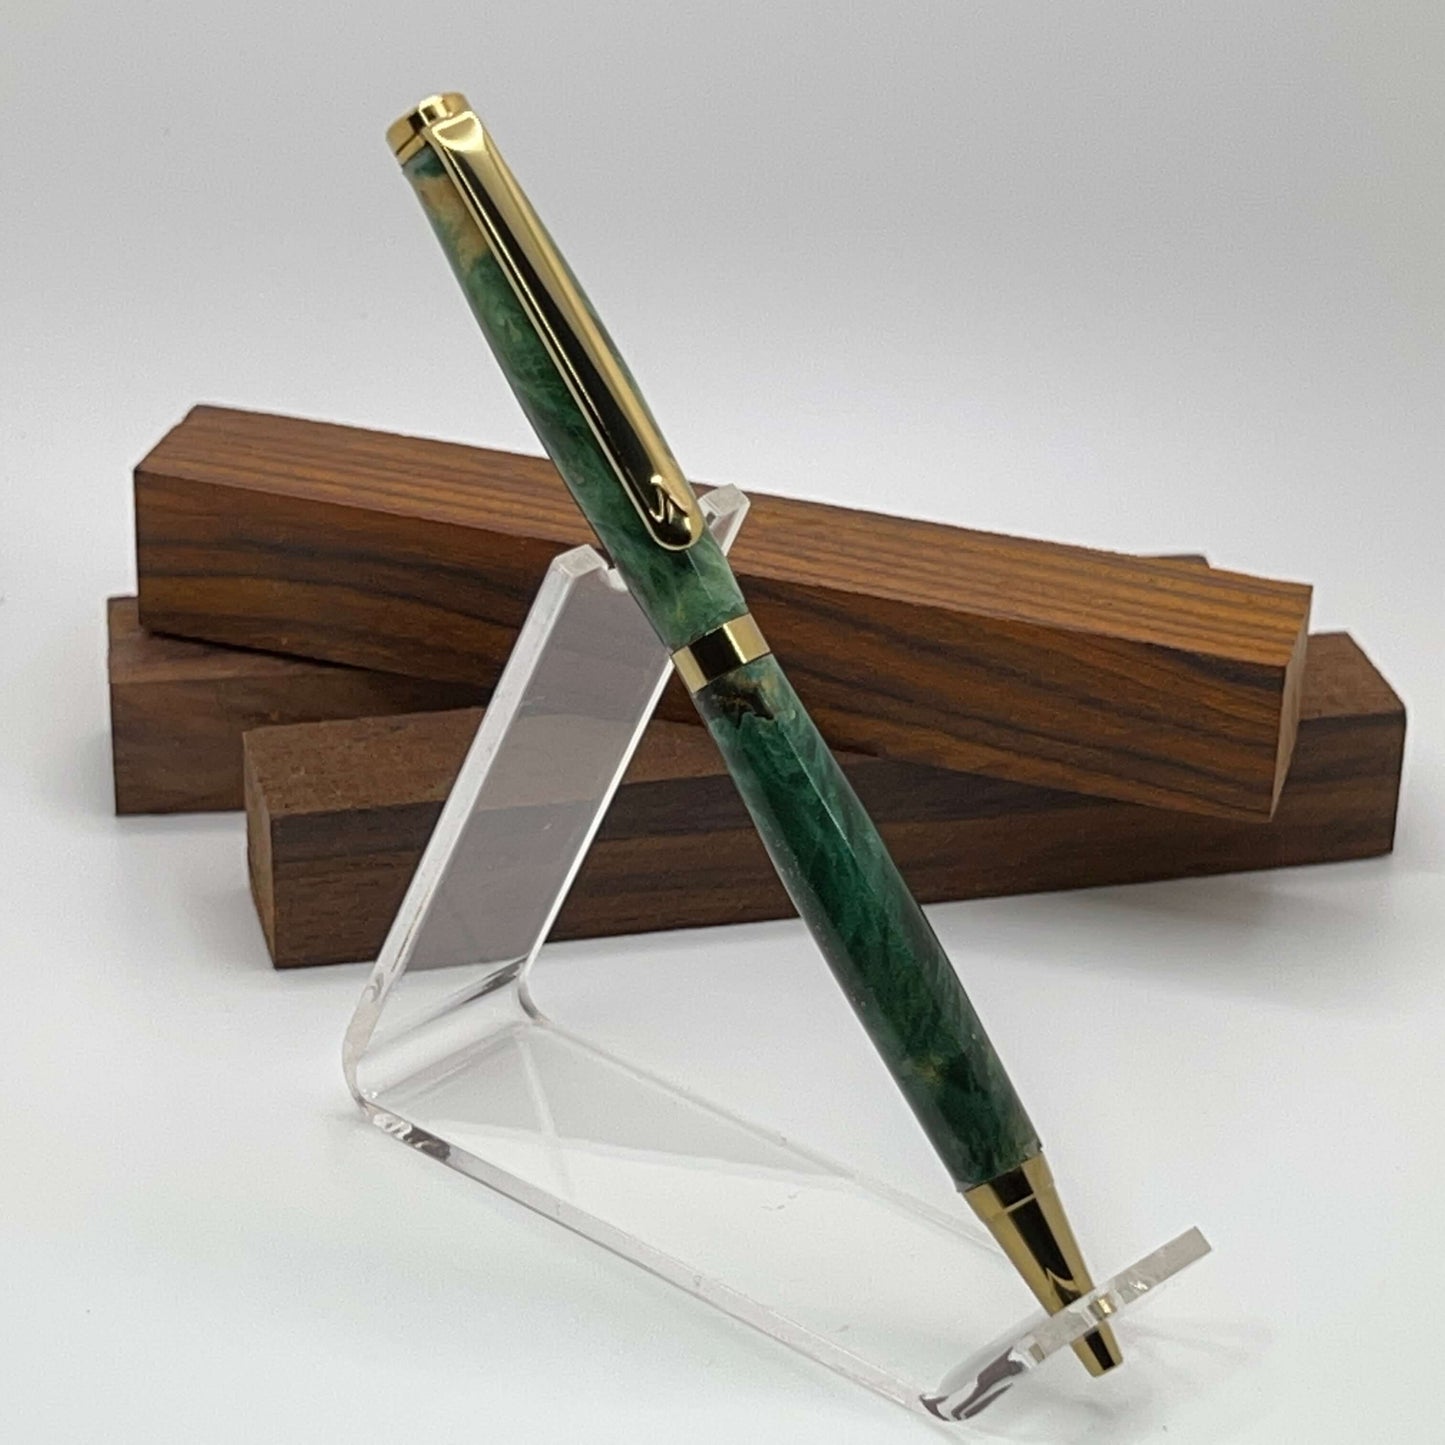 Handcrafted pen with Box Elder Burl wood dyed green and gold titanium hardware